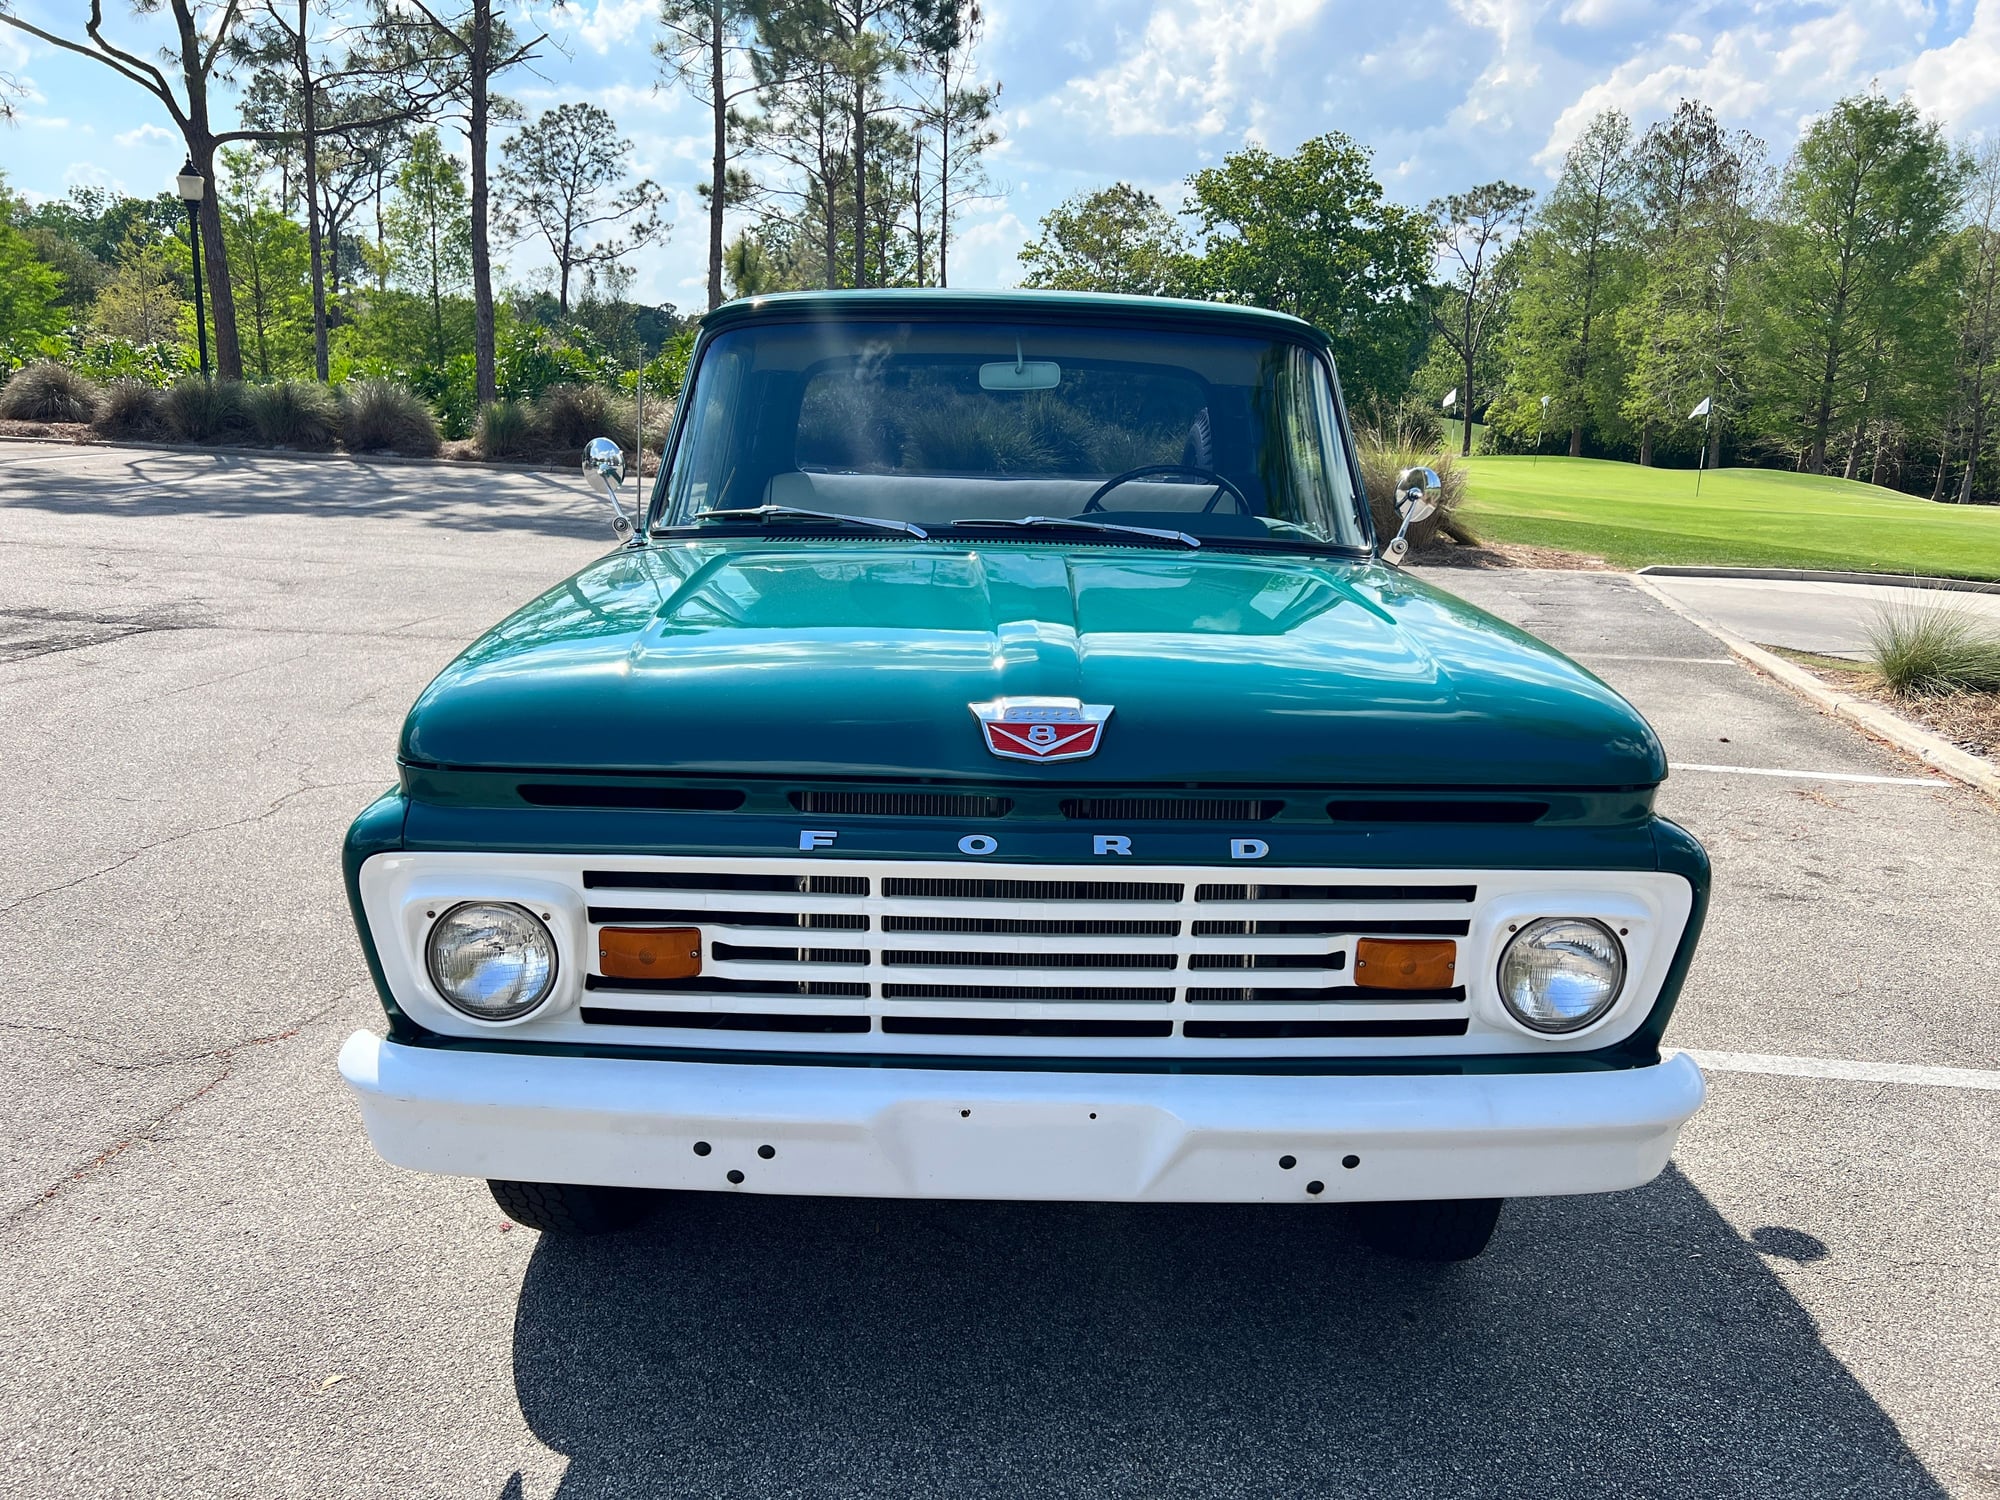 1963 Ford F-100 - 1963 Ford F-100 4-Speed Comprehensive Restoration done prior to May 2019. - Used - VIN F10CR351156 - 103,482 Miles - 8 cyl - 2WD - Manual - Truck - Other - Maitland, FL 32751, United States